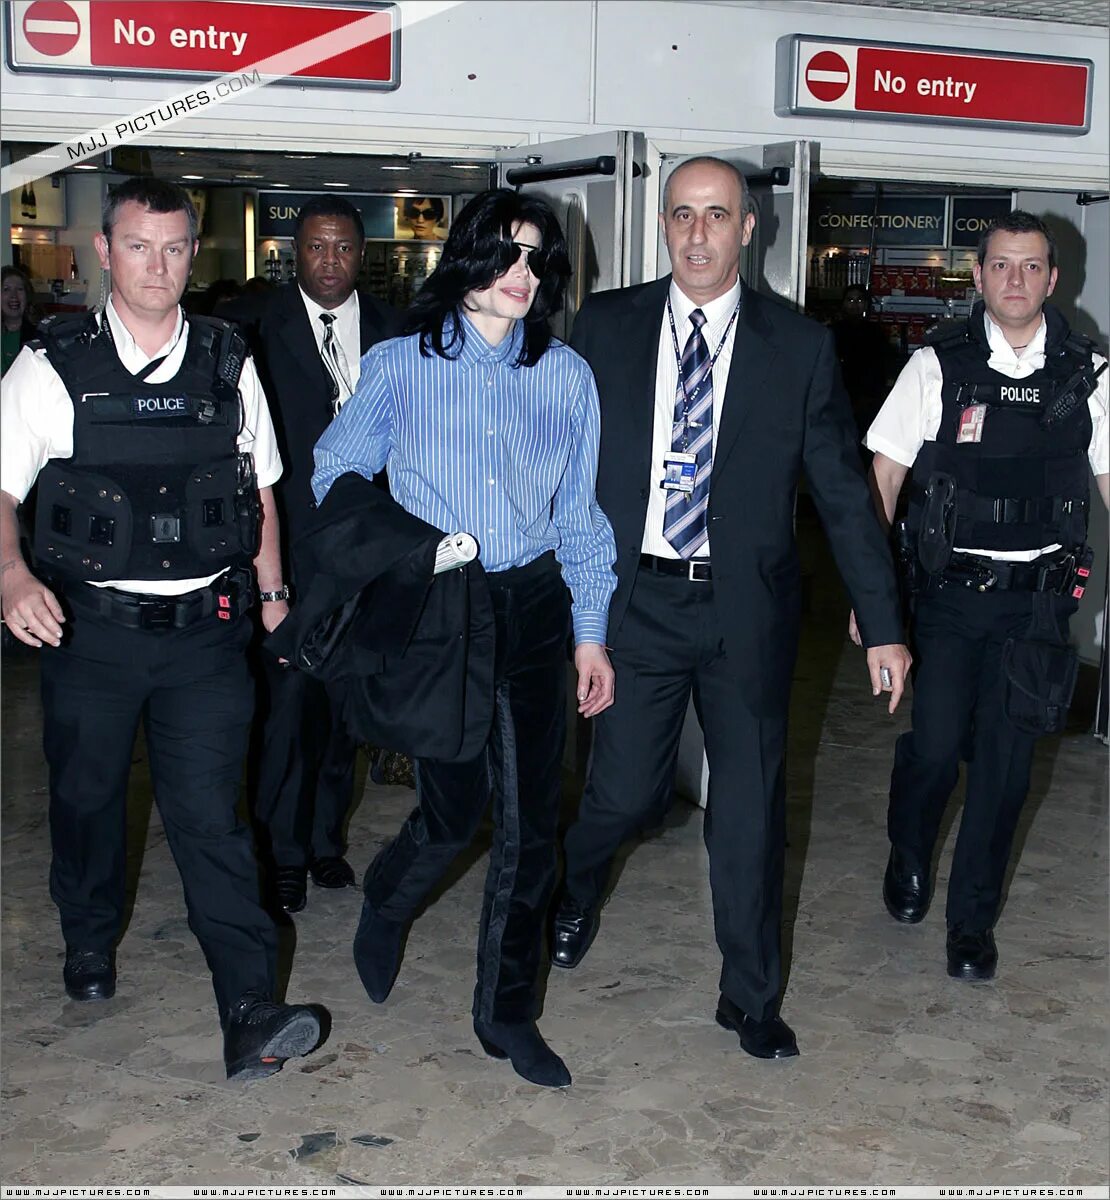 He arrived at the airport. Michael Jackson Heathrow 2007. Michael Jackson 2002 Heathrow. Michael Jackson 2001 Heathrow.